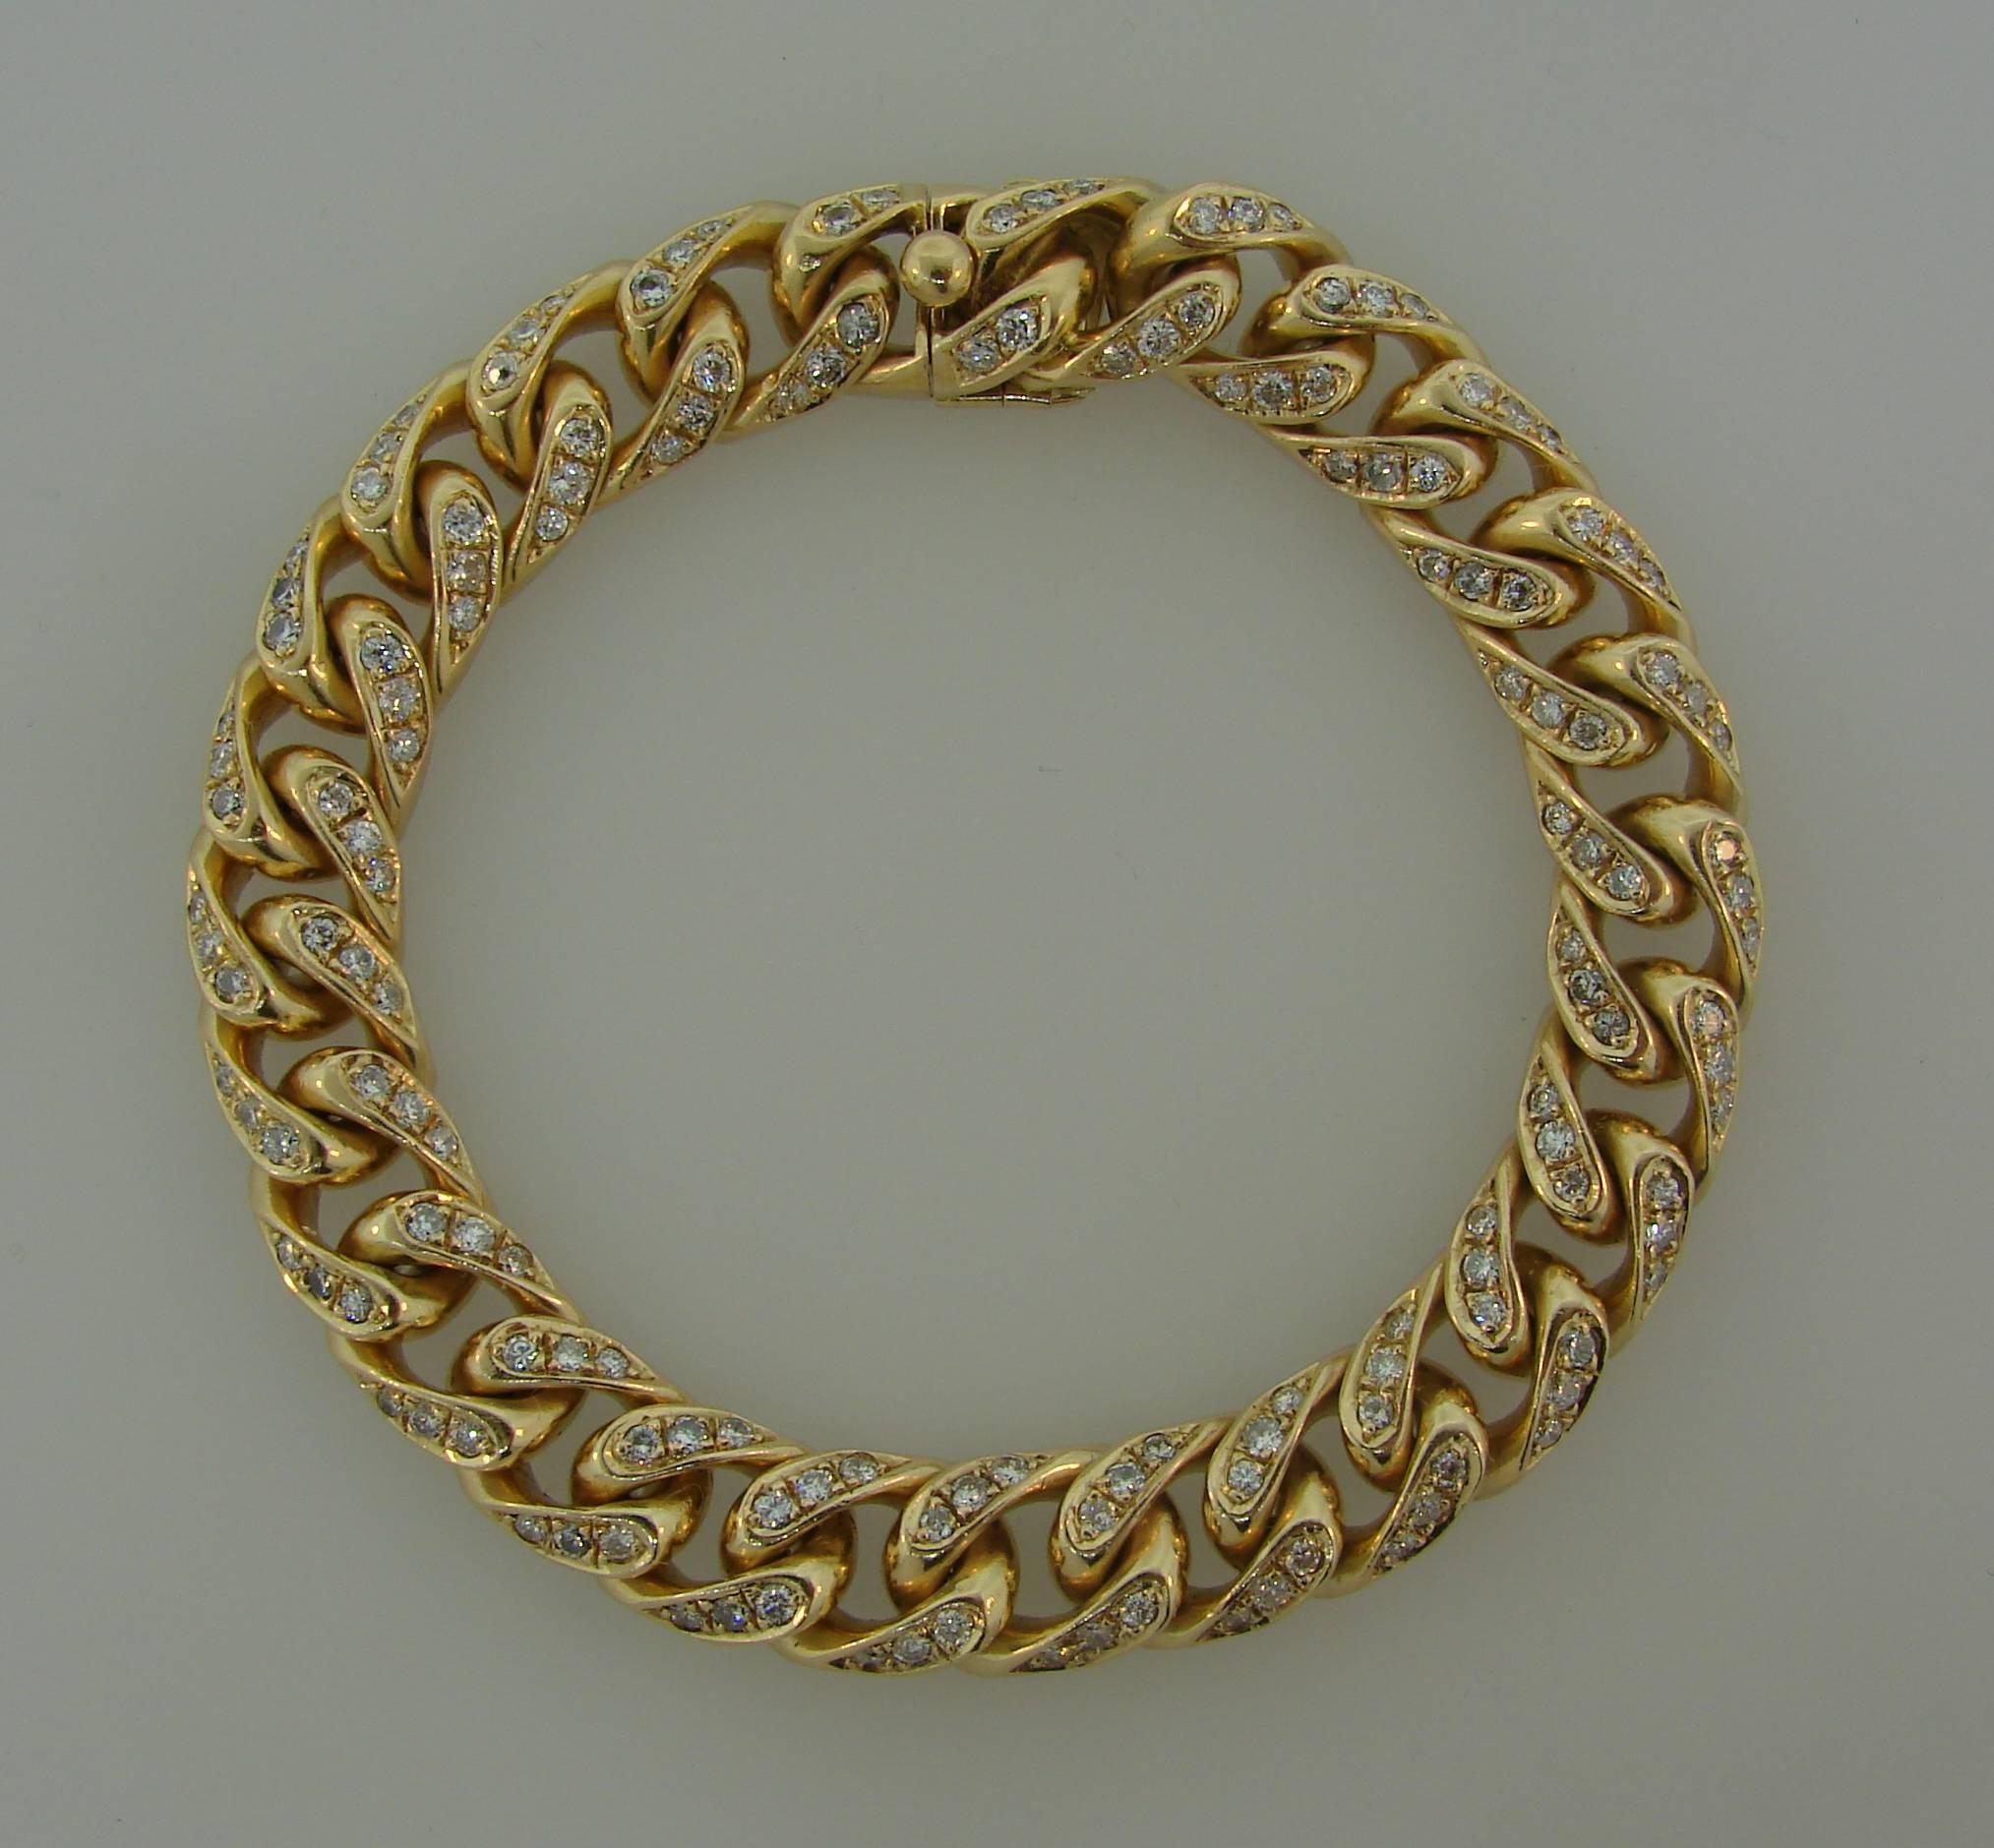 Bold yet elegant bracelet created by Bulgari in Italy in the 1970s. Chic and wearable, it is a great addition to your jewelry collection. 
The bracelet is made of 18 karat yellow gold and set with round brilliant cut diamonds (total weight